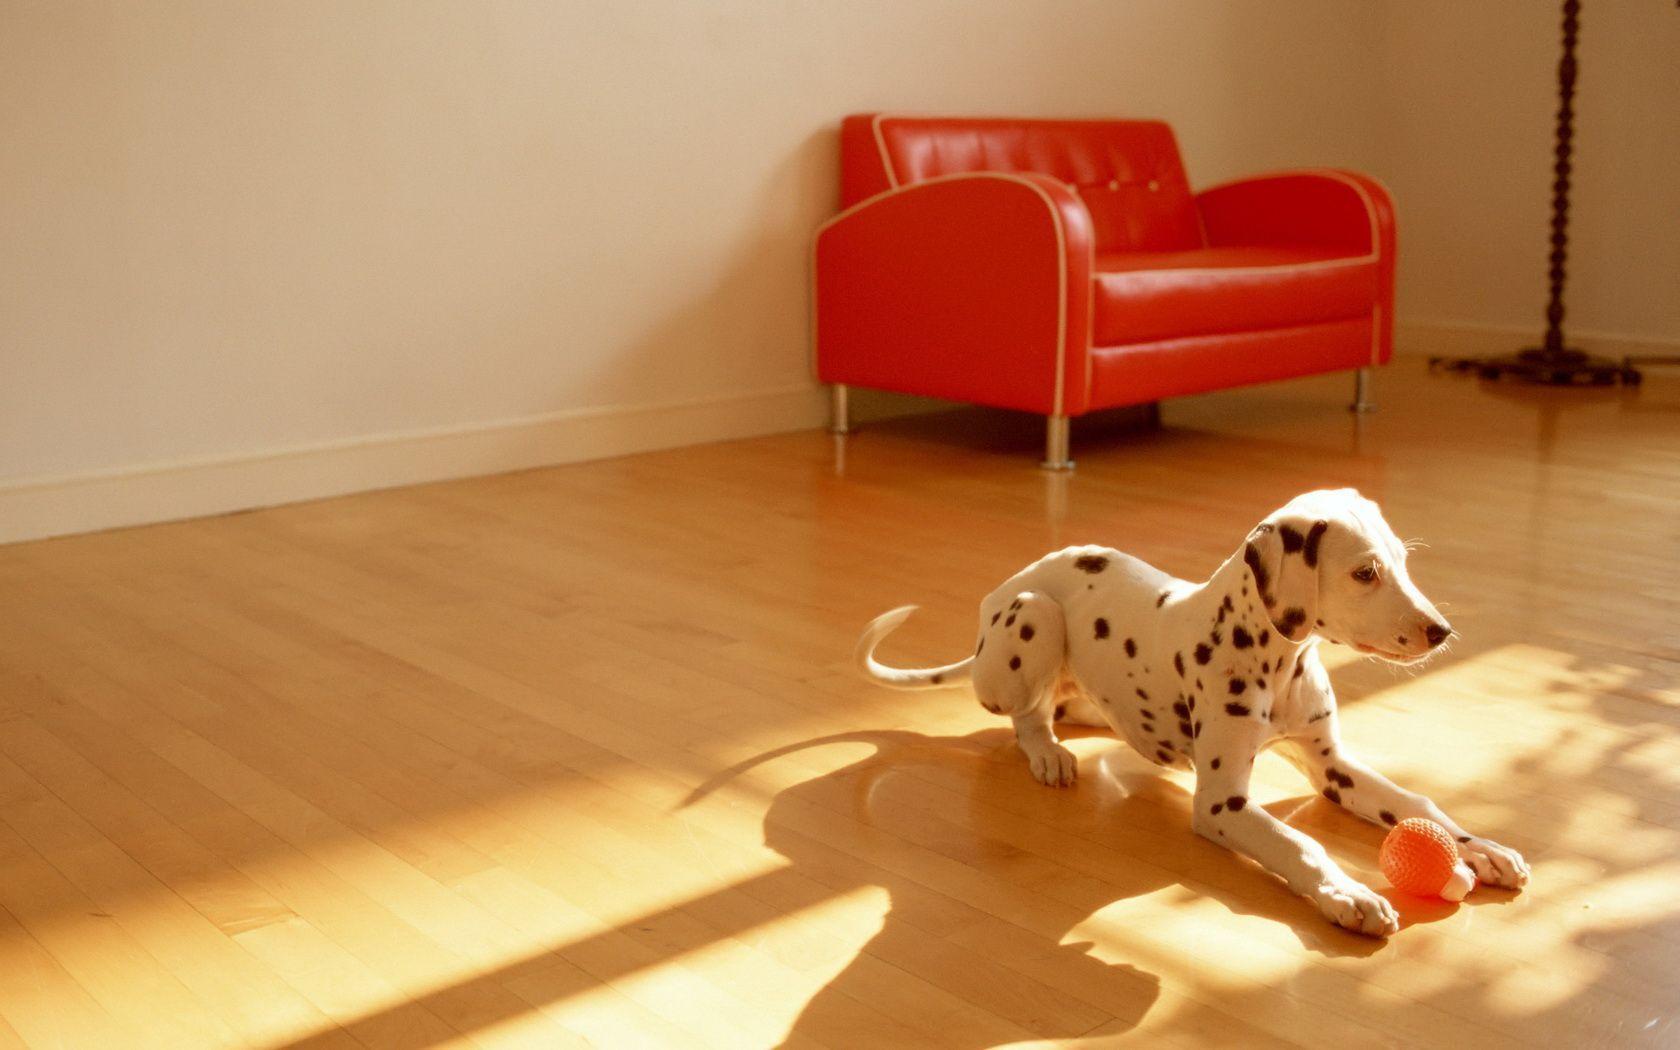 Dalmatian Dogs, puppies Picture, Image and Wallpaper